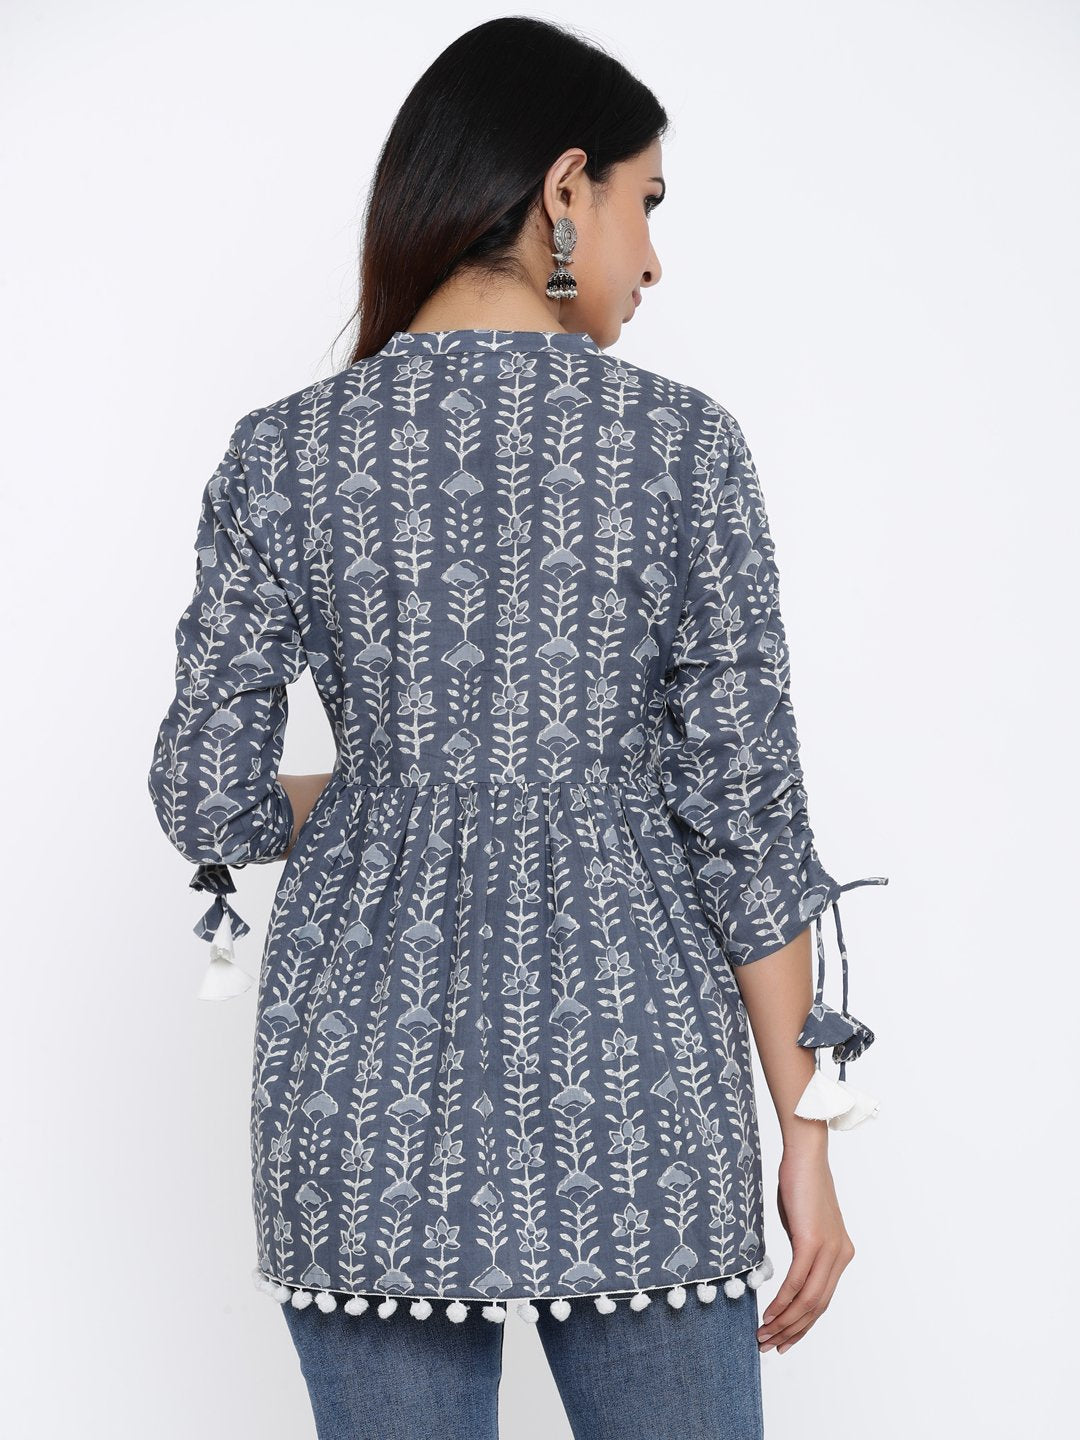 Women's Printed Cotton Fabric Short Tunic With Tie-Up Sleves Details In Grey Color - Kipek